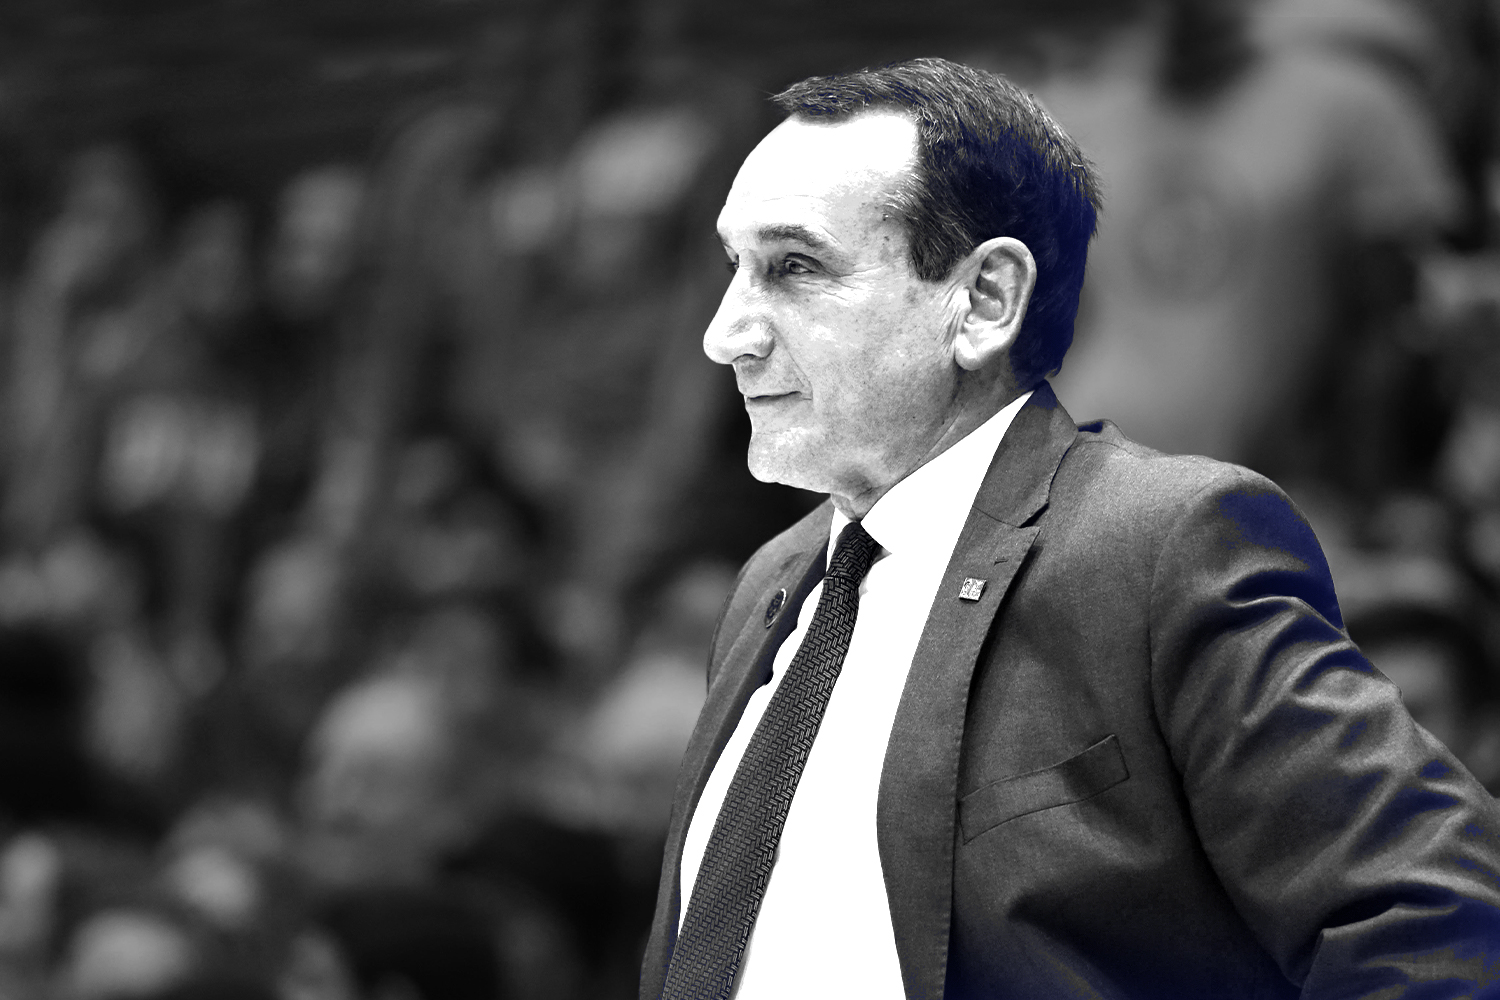 Coach K to Retire After Legendary Career